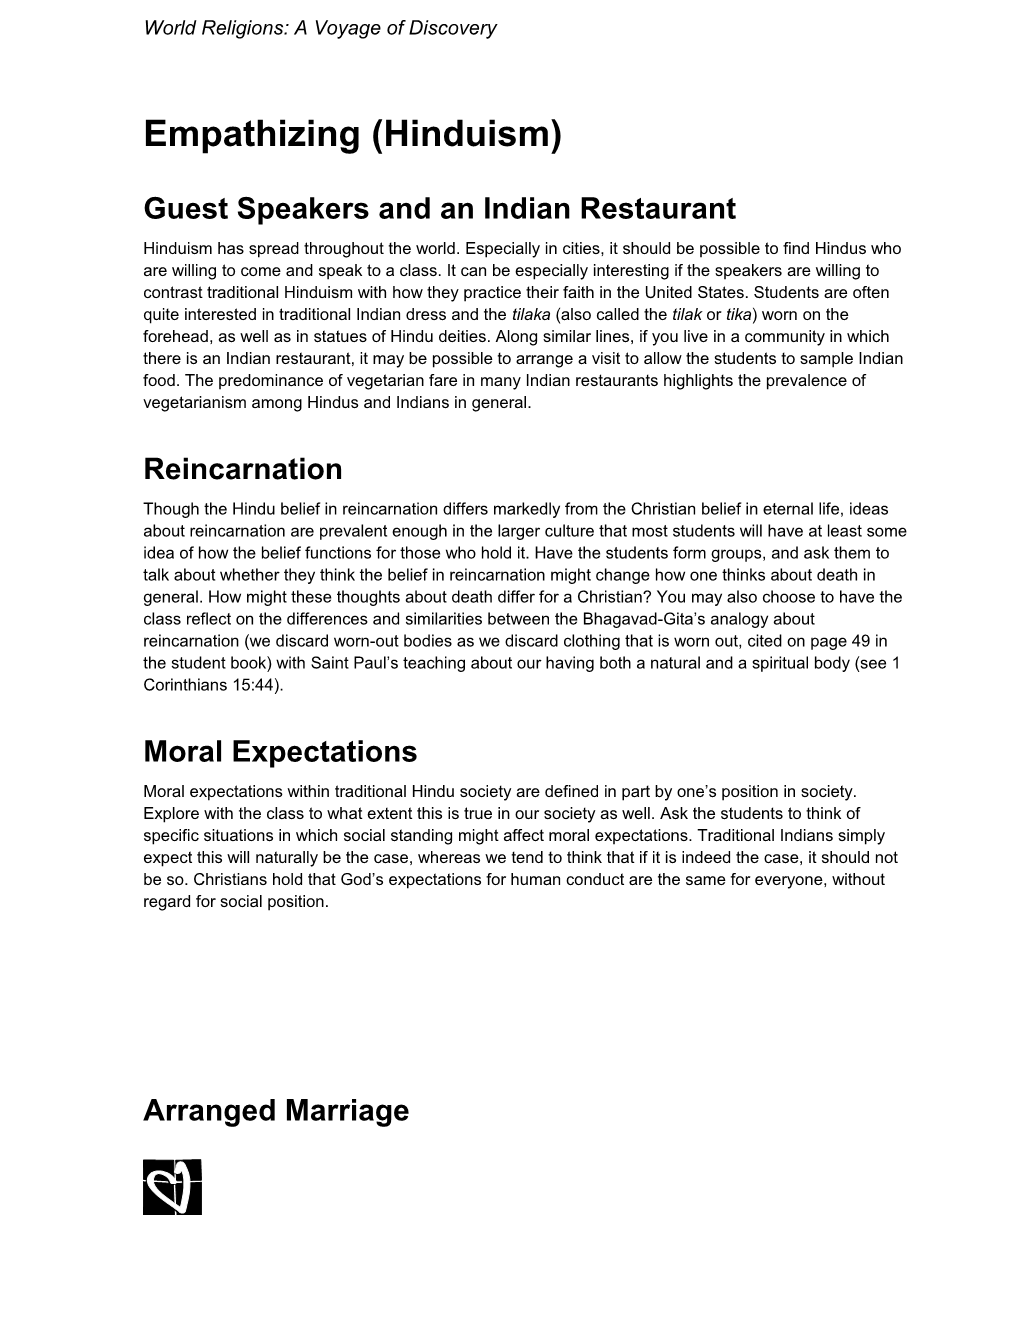 Guest Speakers and an Indian Restaurant